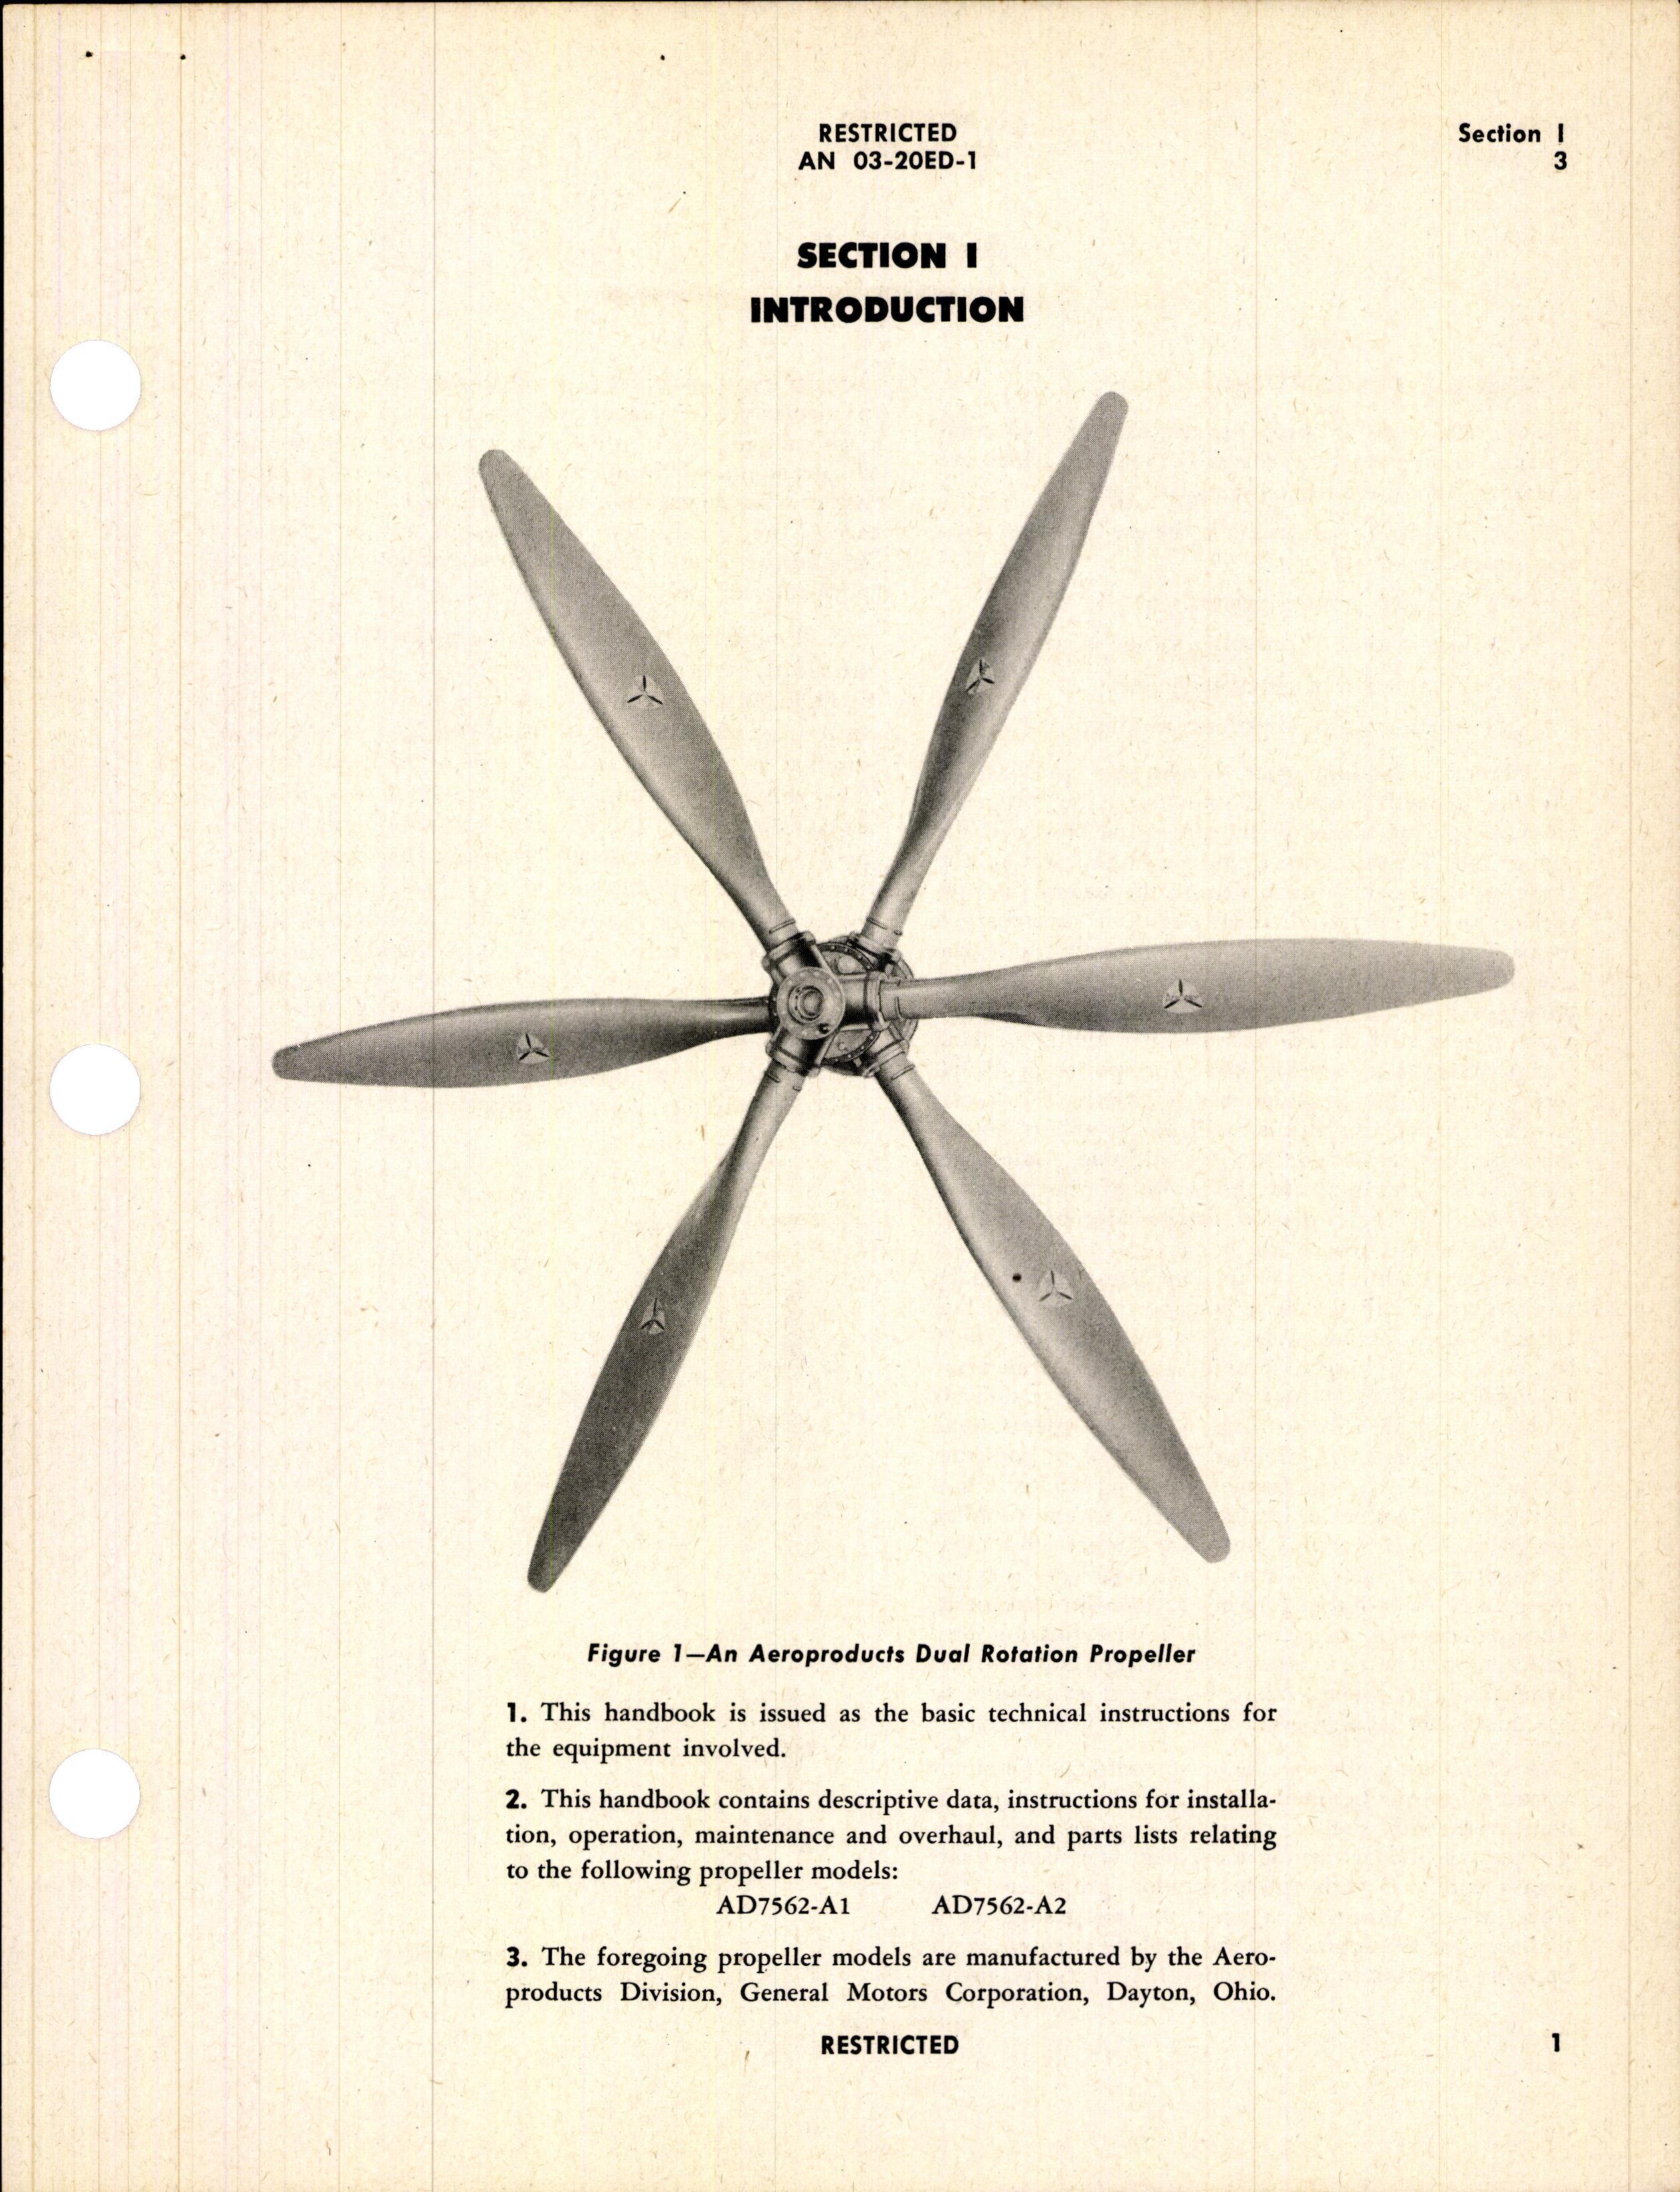 Sample page 5 from AirCorps Library document: Handbook of Instructions with Parts Catalog for Dual Rotation Propellers